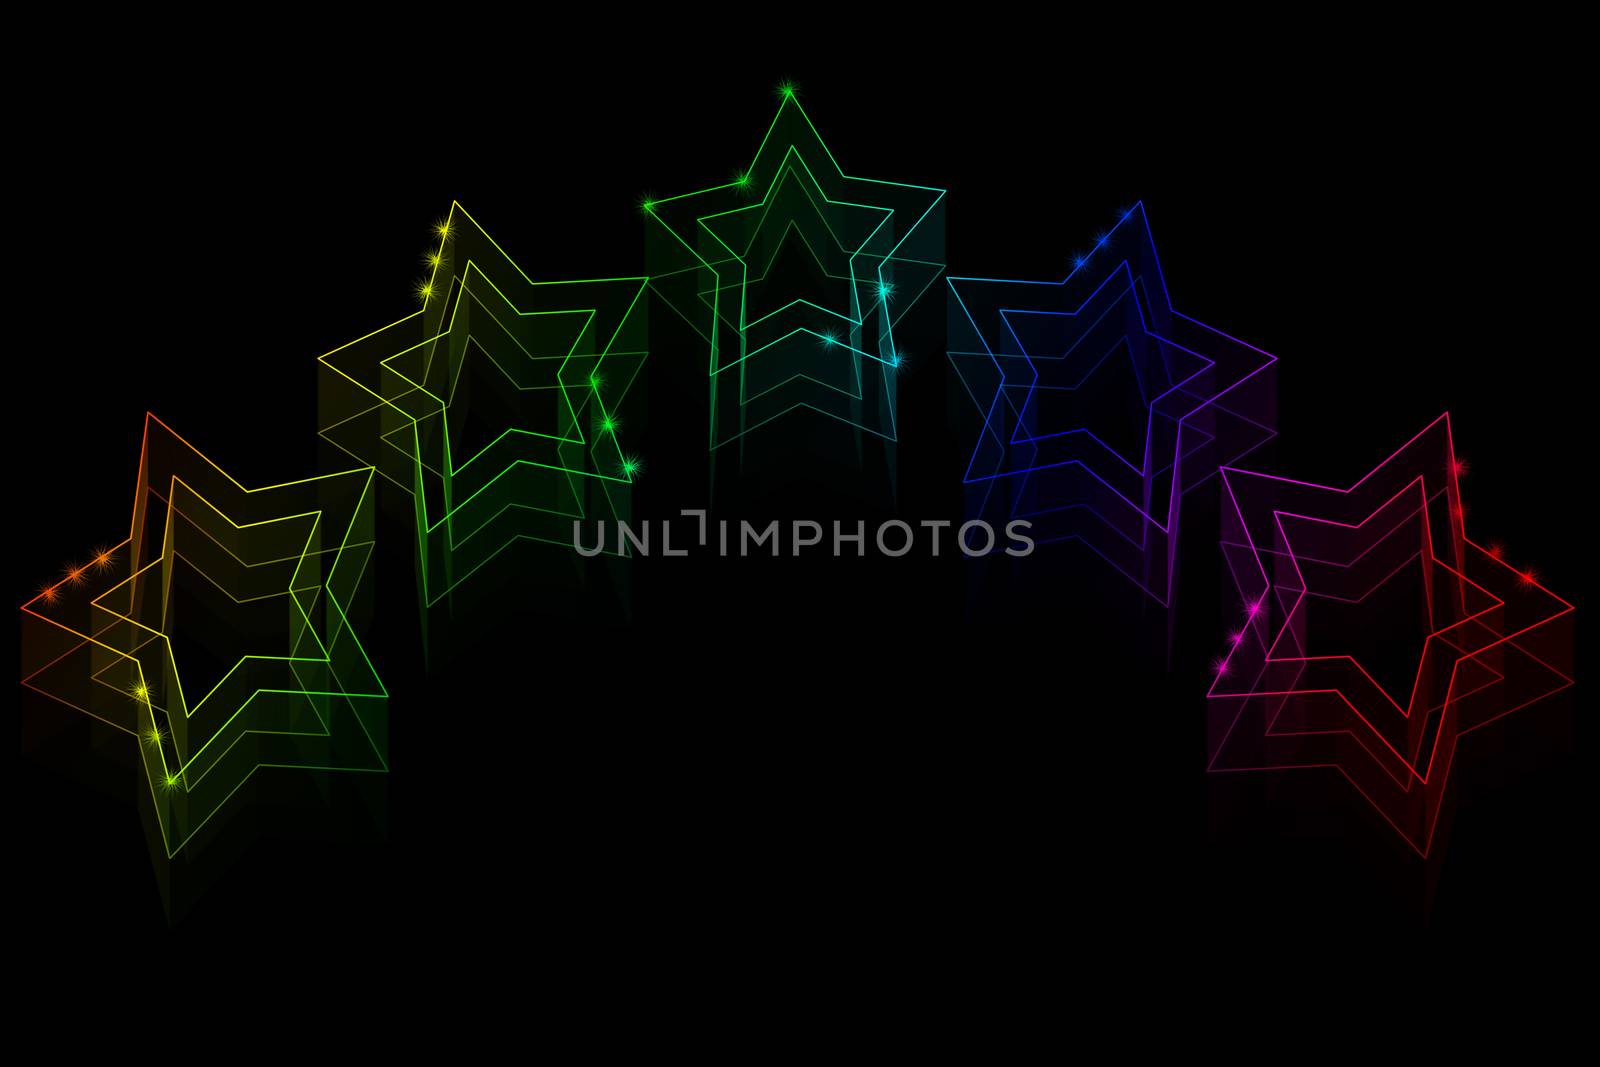 Lots of neon stars on a black background